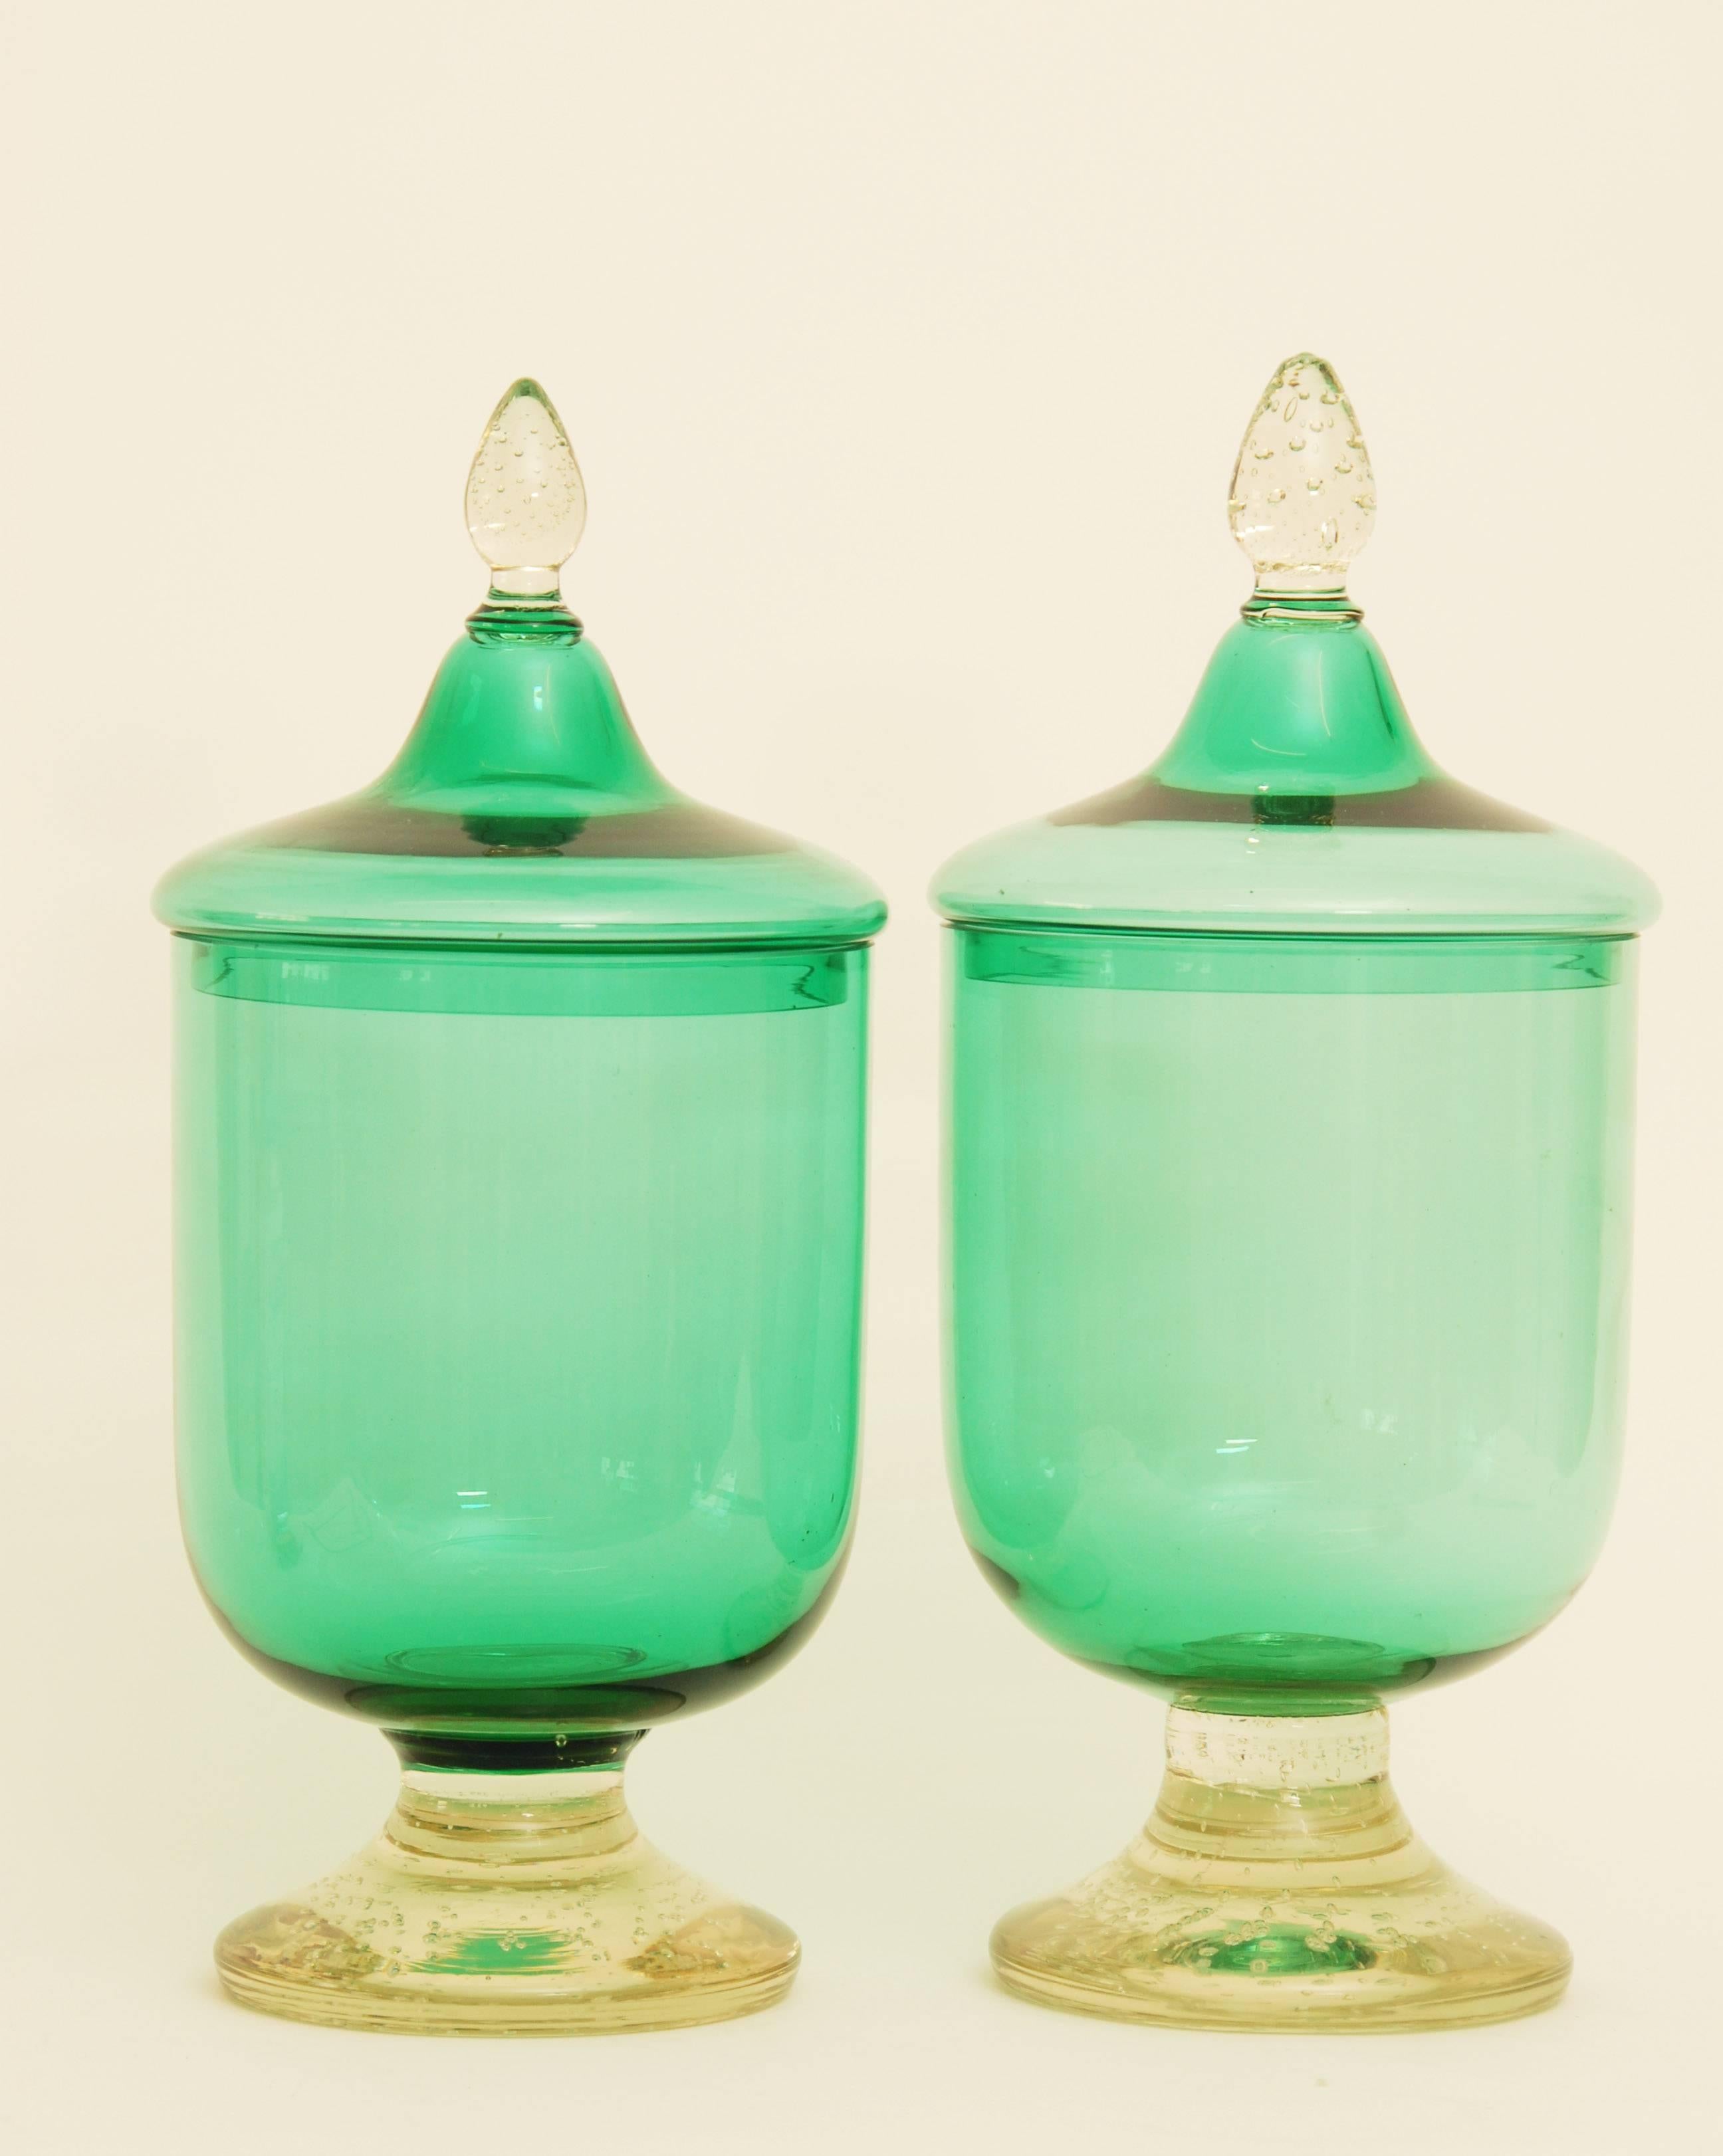 Pair of Murano Glass Lidded Urns or Vases For Sale 1